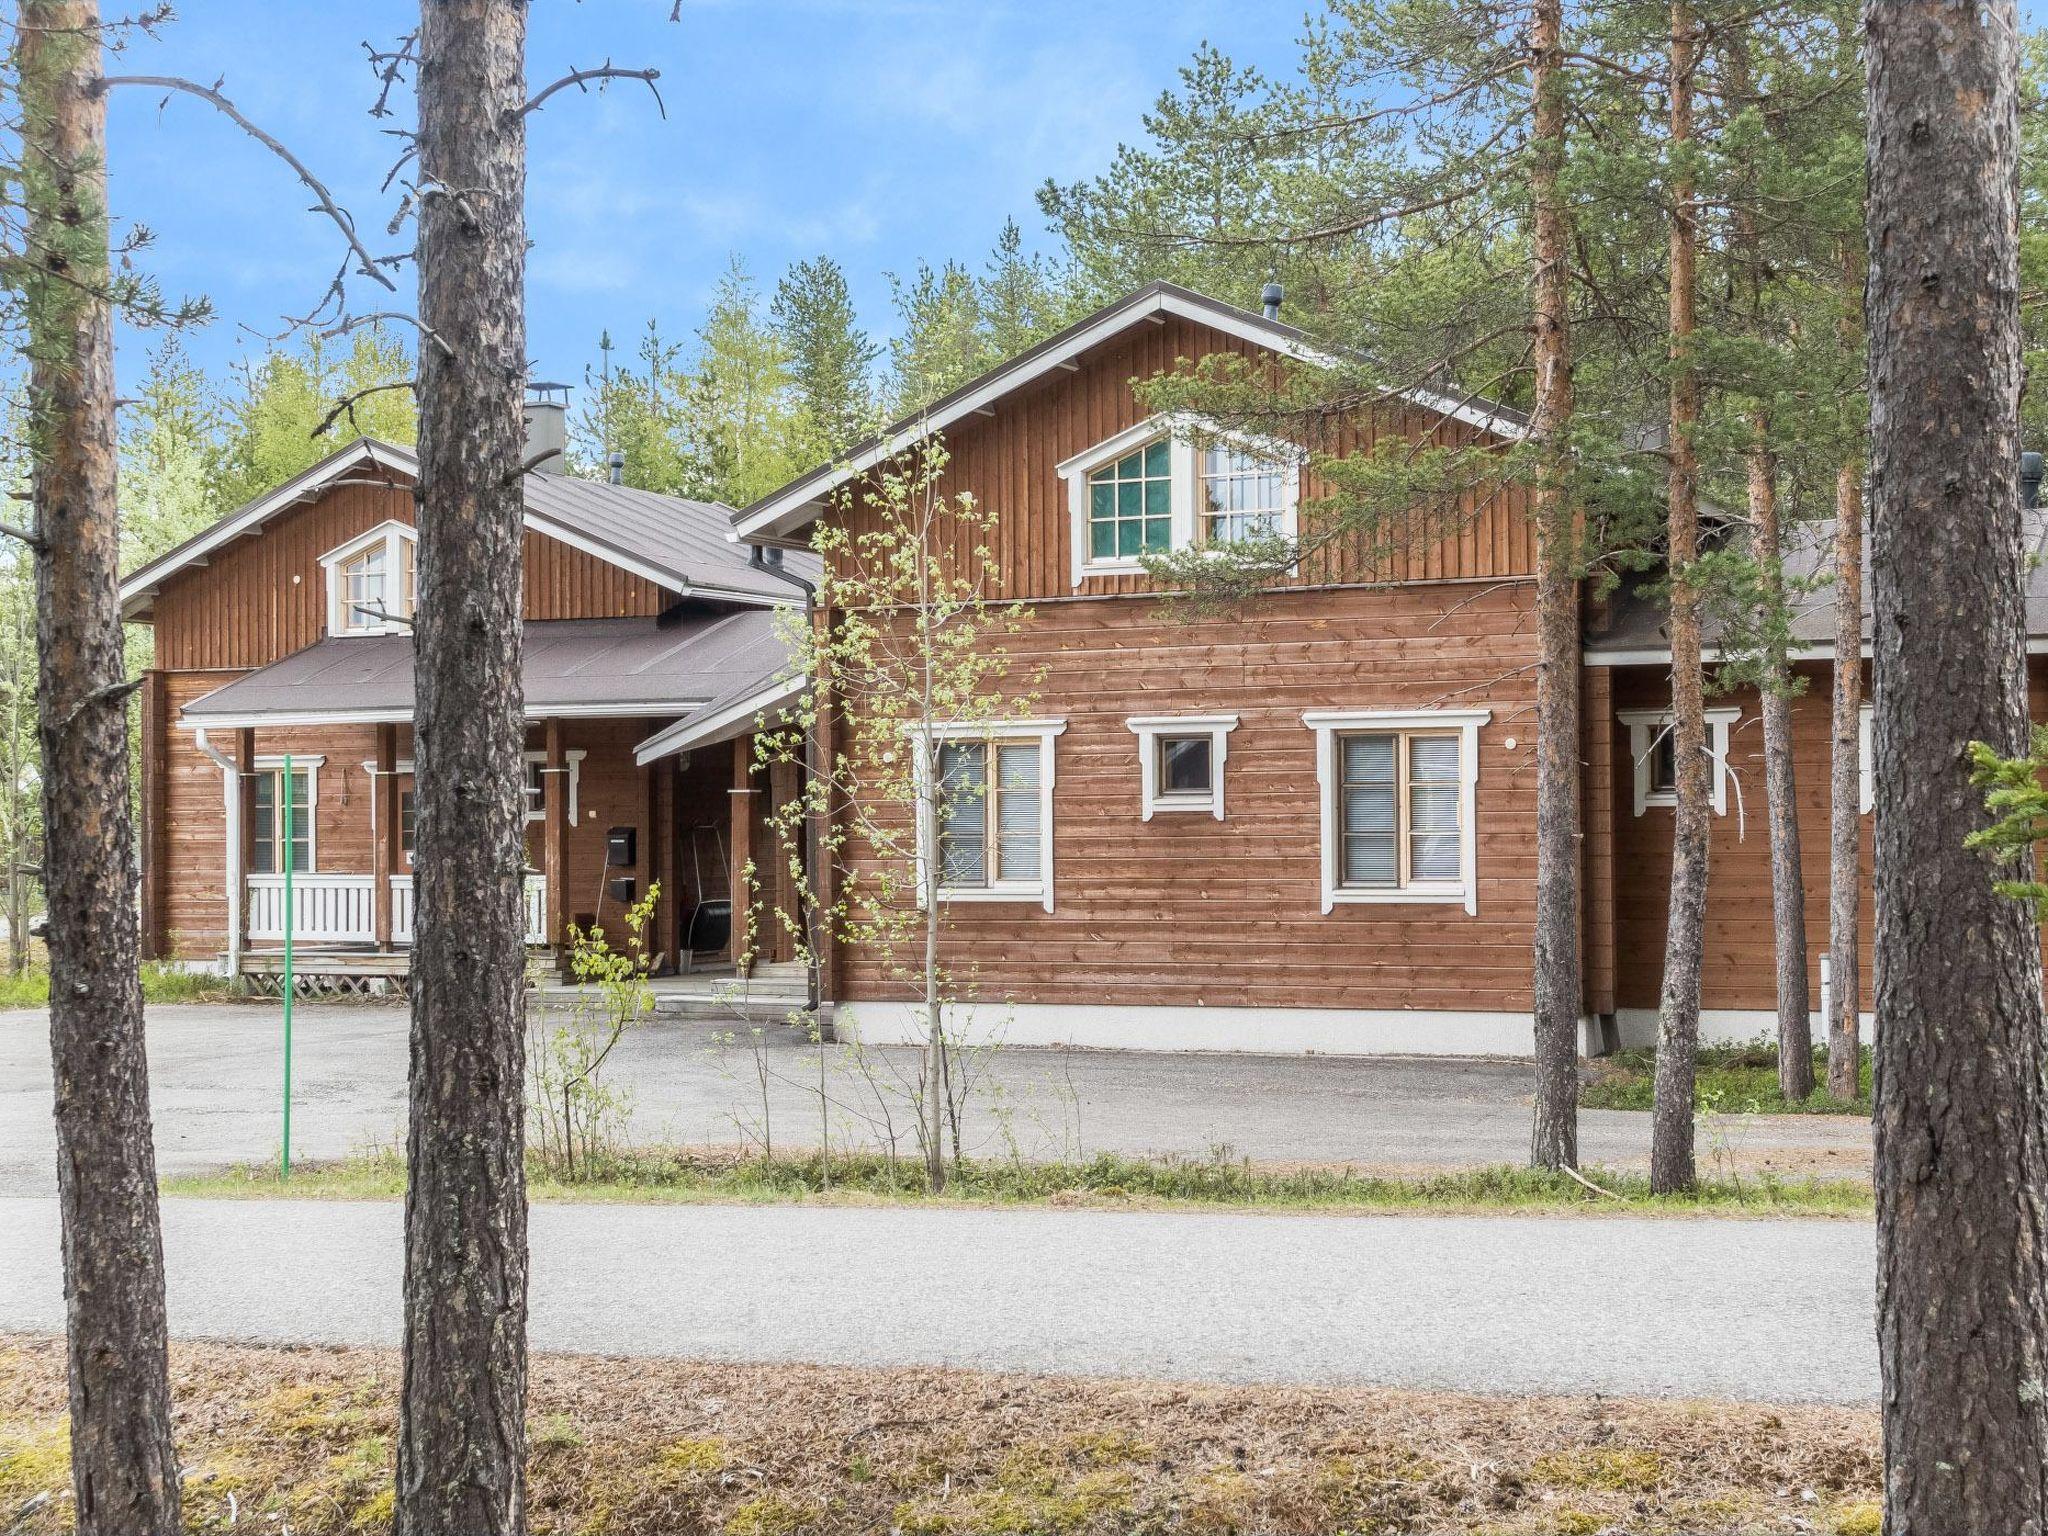 Photo 5 - 4 bedroom House in Kittilä with sauna and mountain view